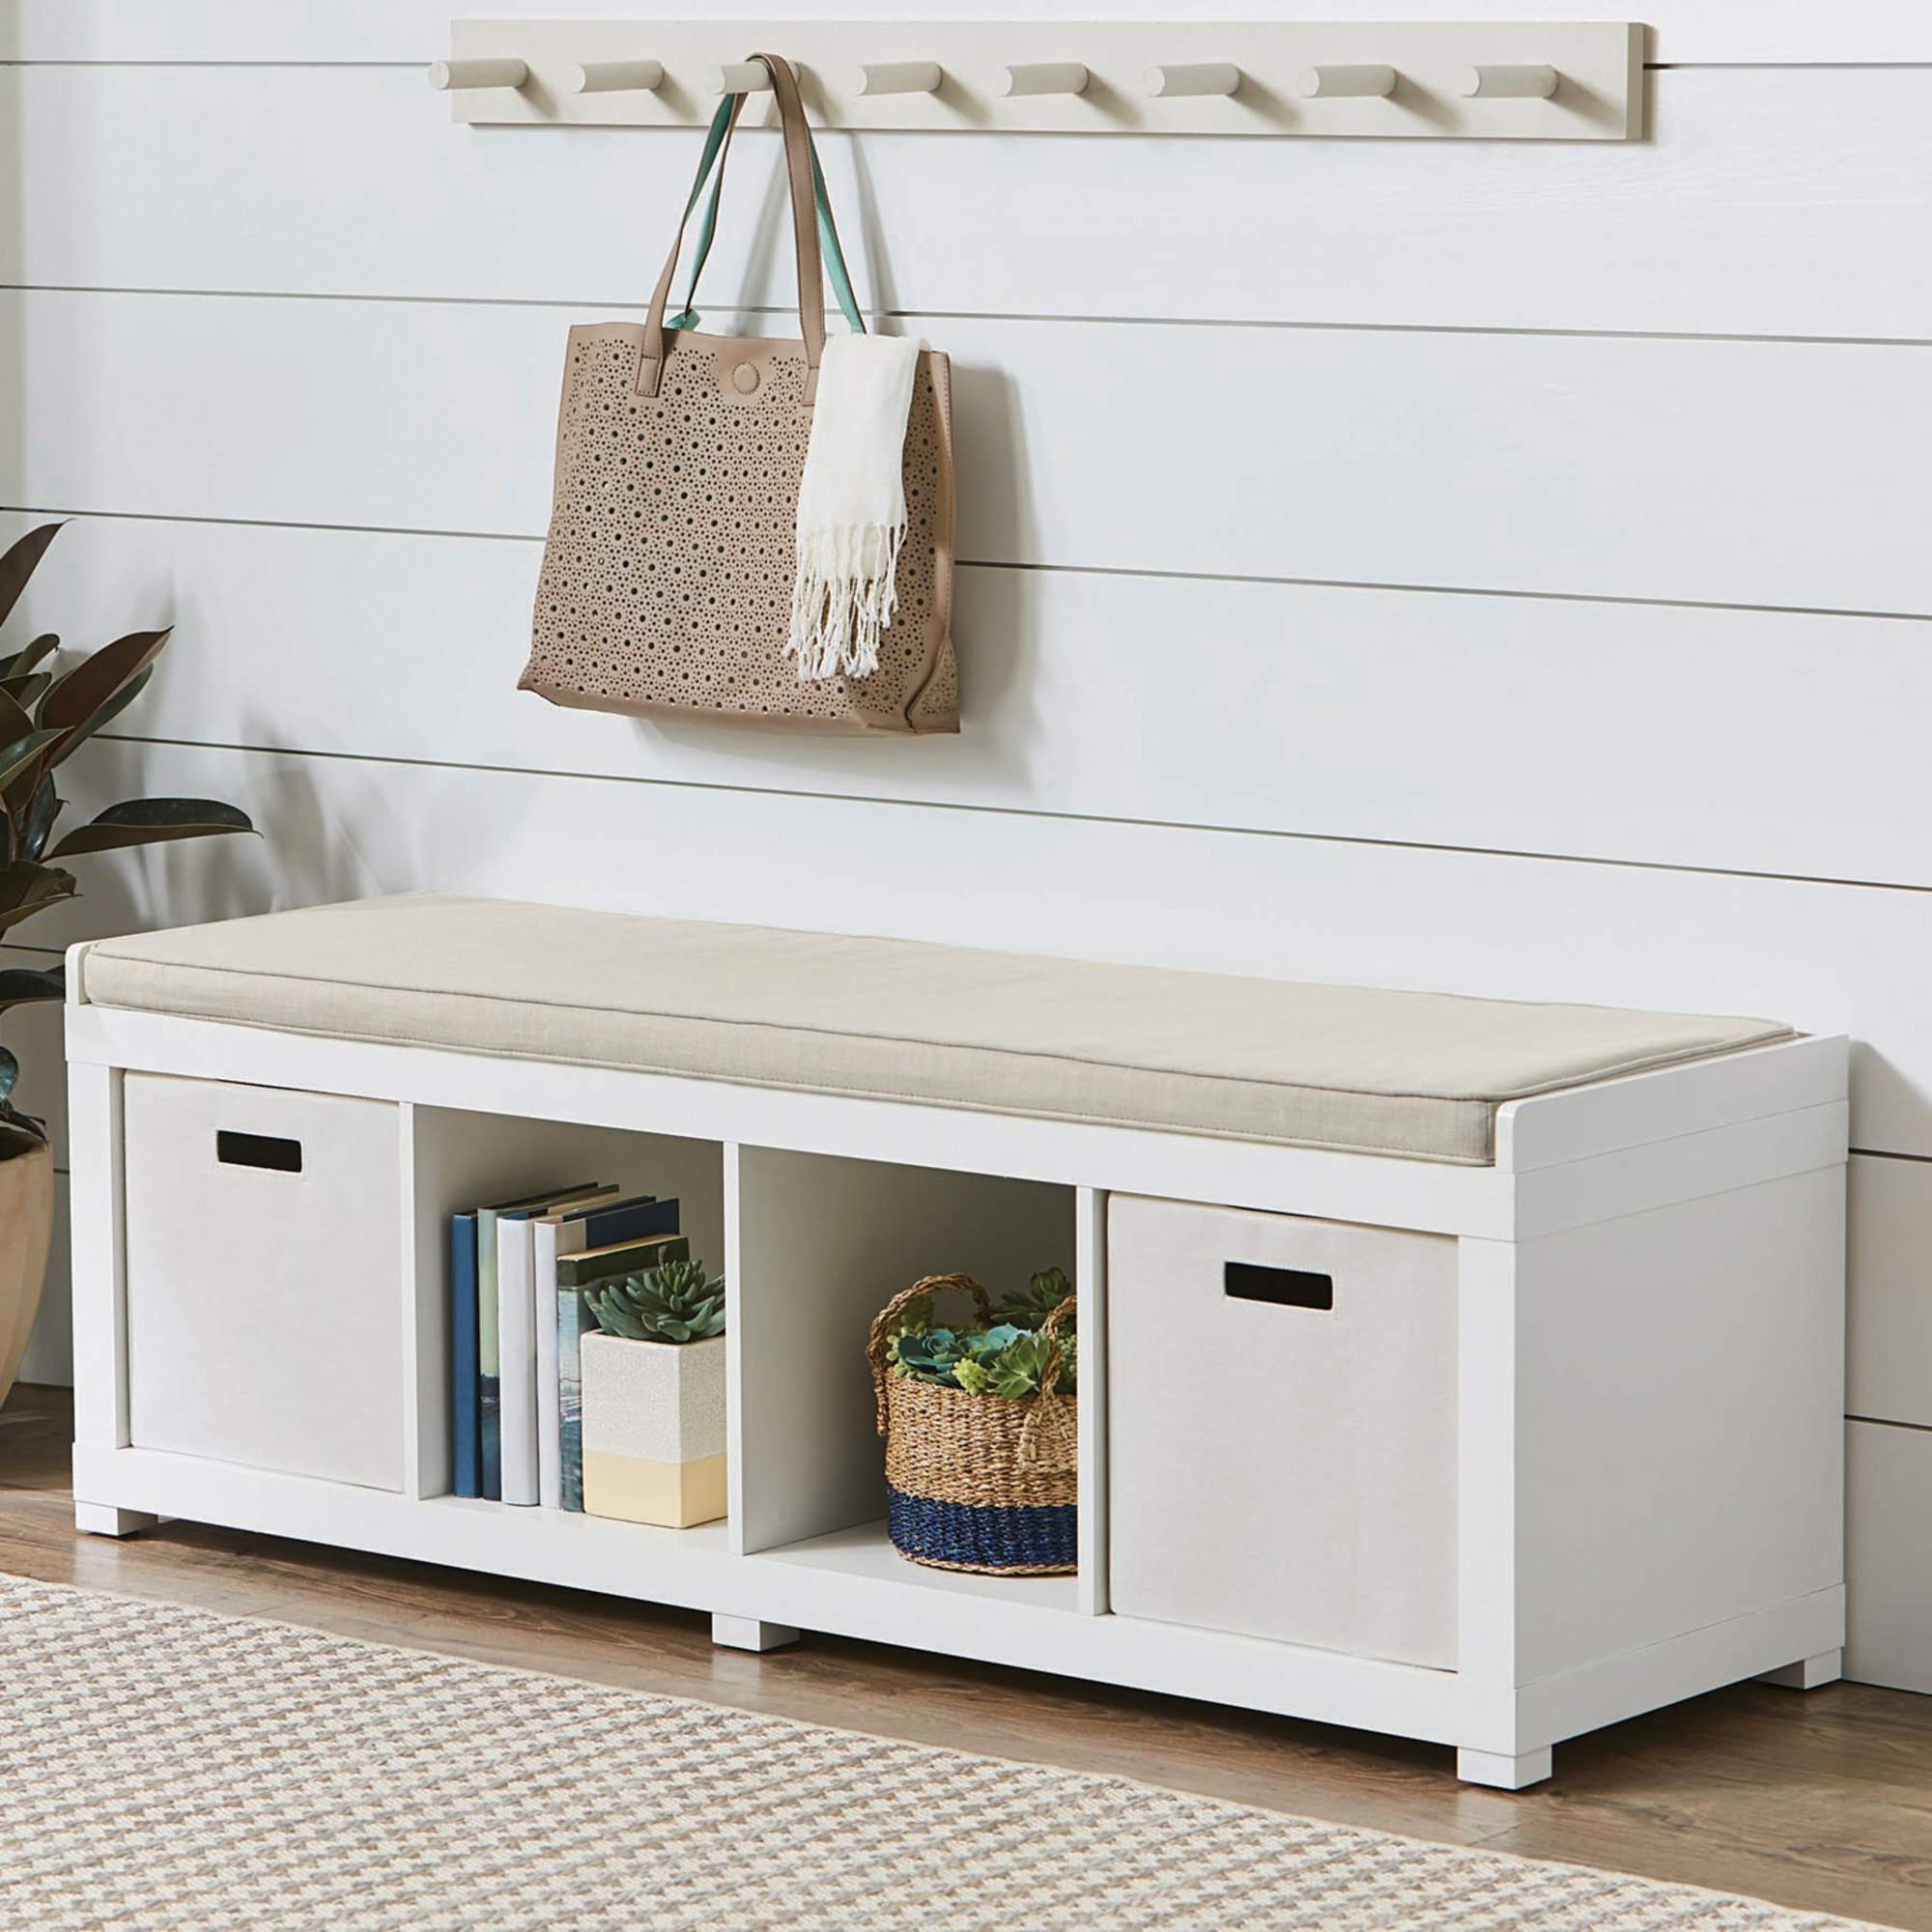 Better Homes & Gardens 4-Cube Shoe Storage Bench, White - image 1 of 6